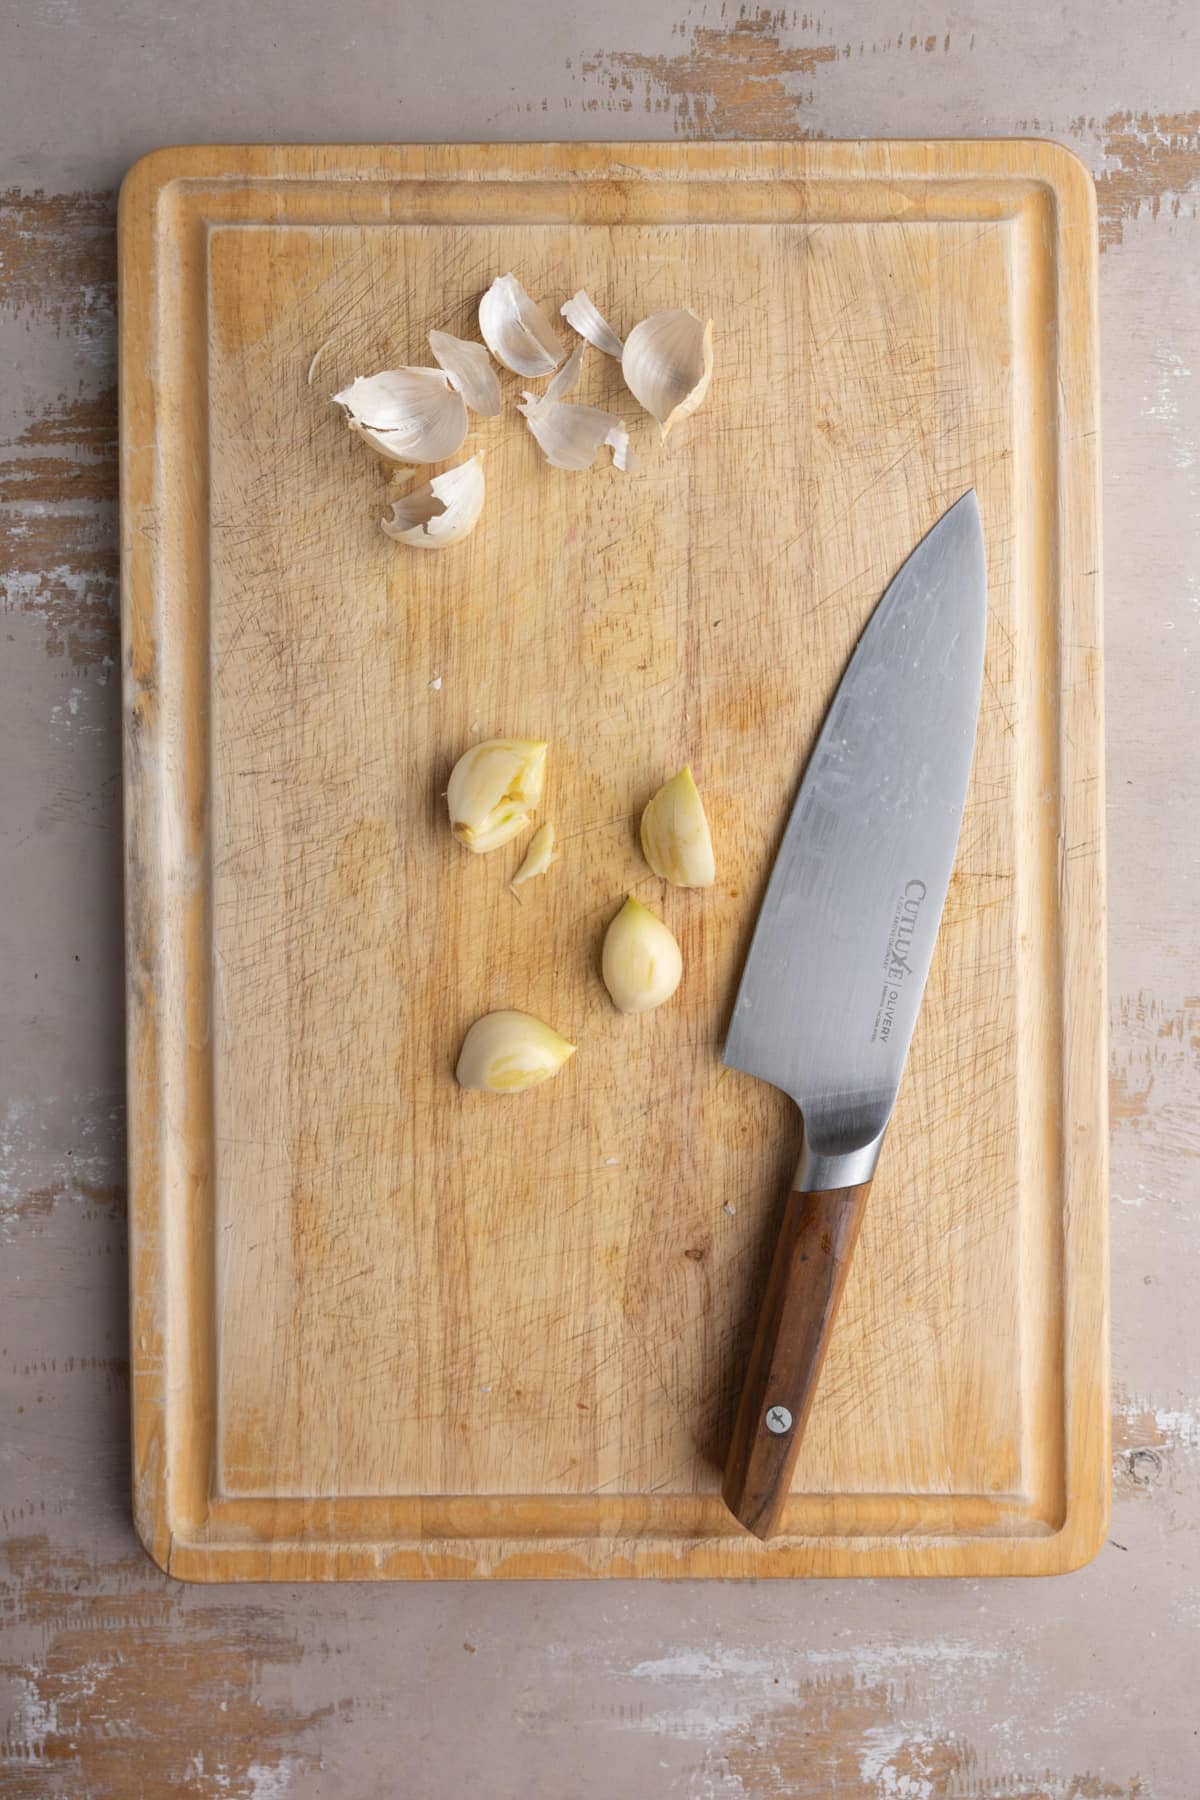 Peeled garlic to add to a vegetable-based broth.